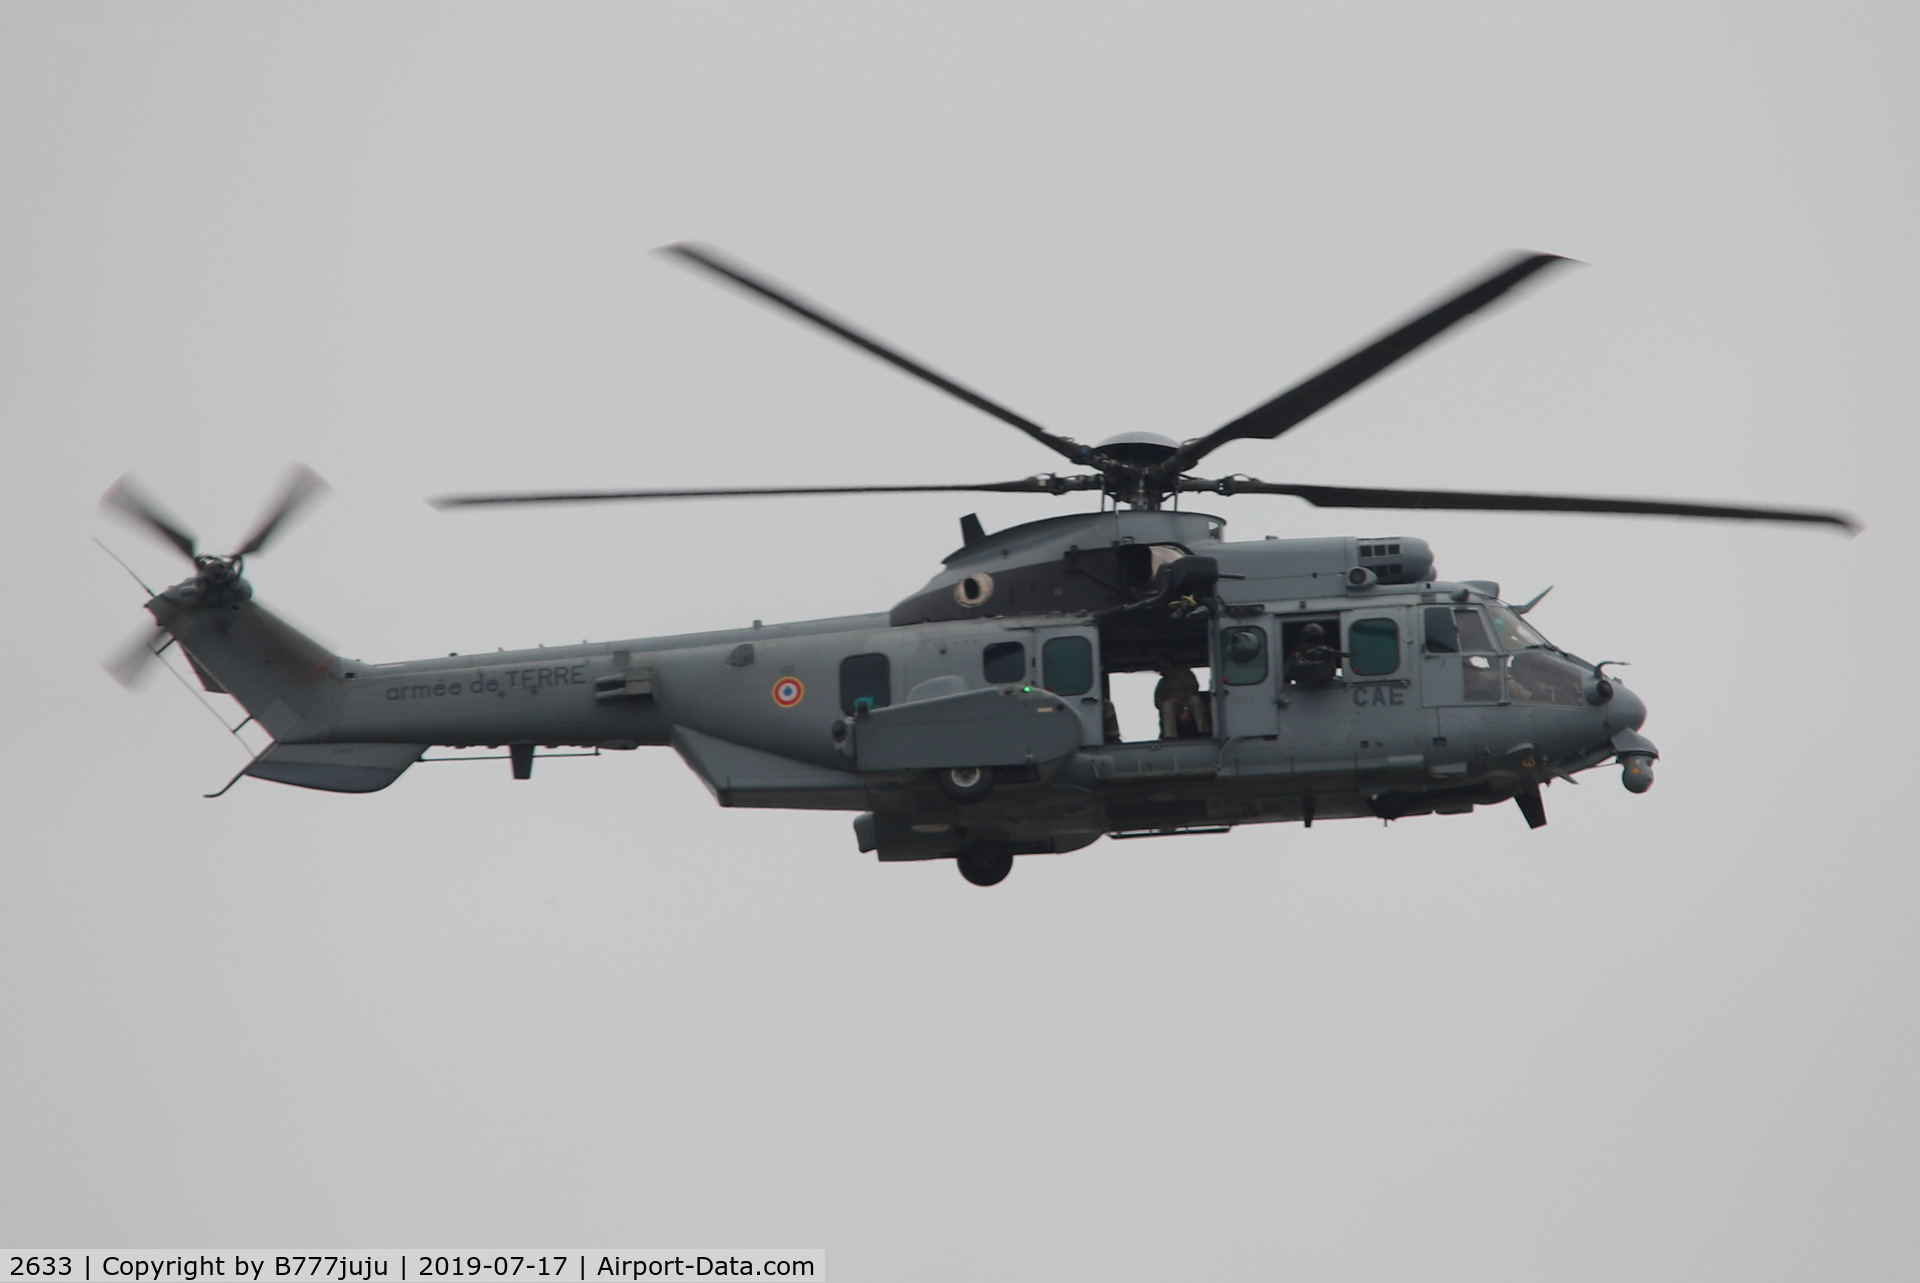 2633, Eurocopter EC-725AP Cougar C/N 2633, during French Parade over Paris